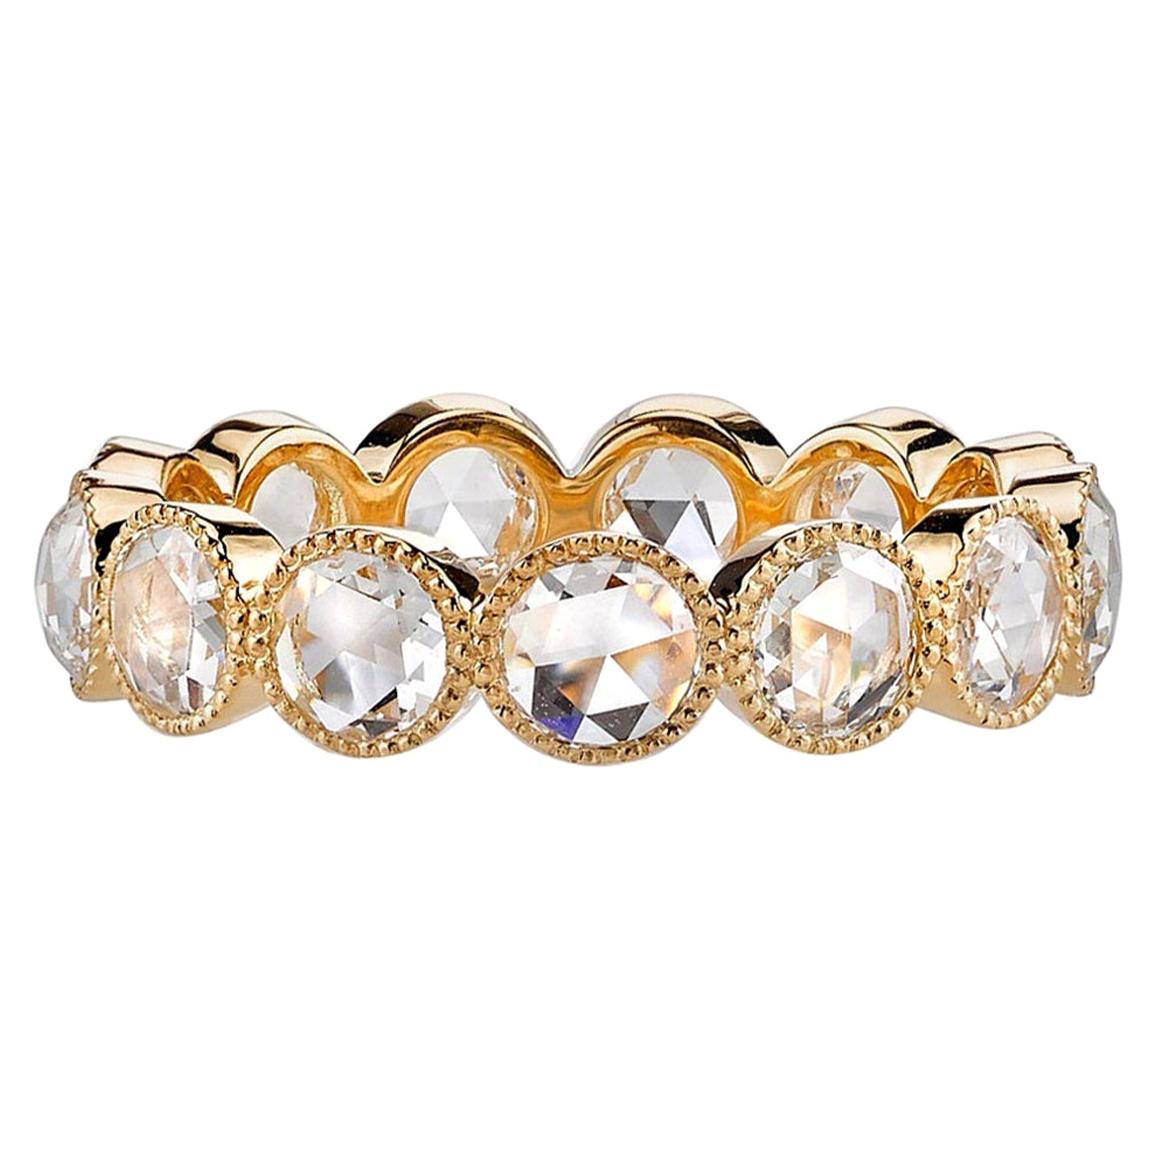 For Sale:  Handcrafted Gabby Rose Cut Diamond Eternity Band by Single Stone